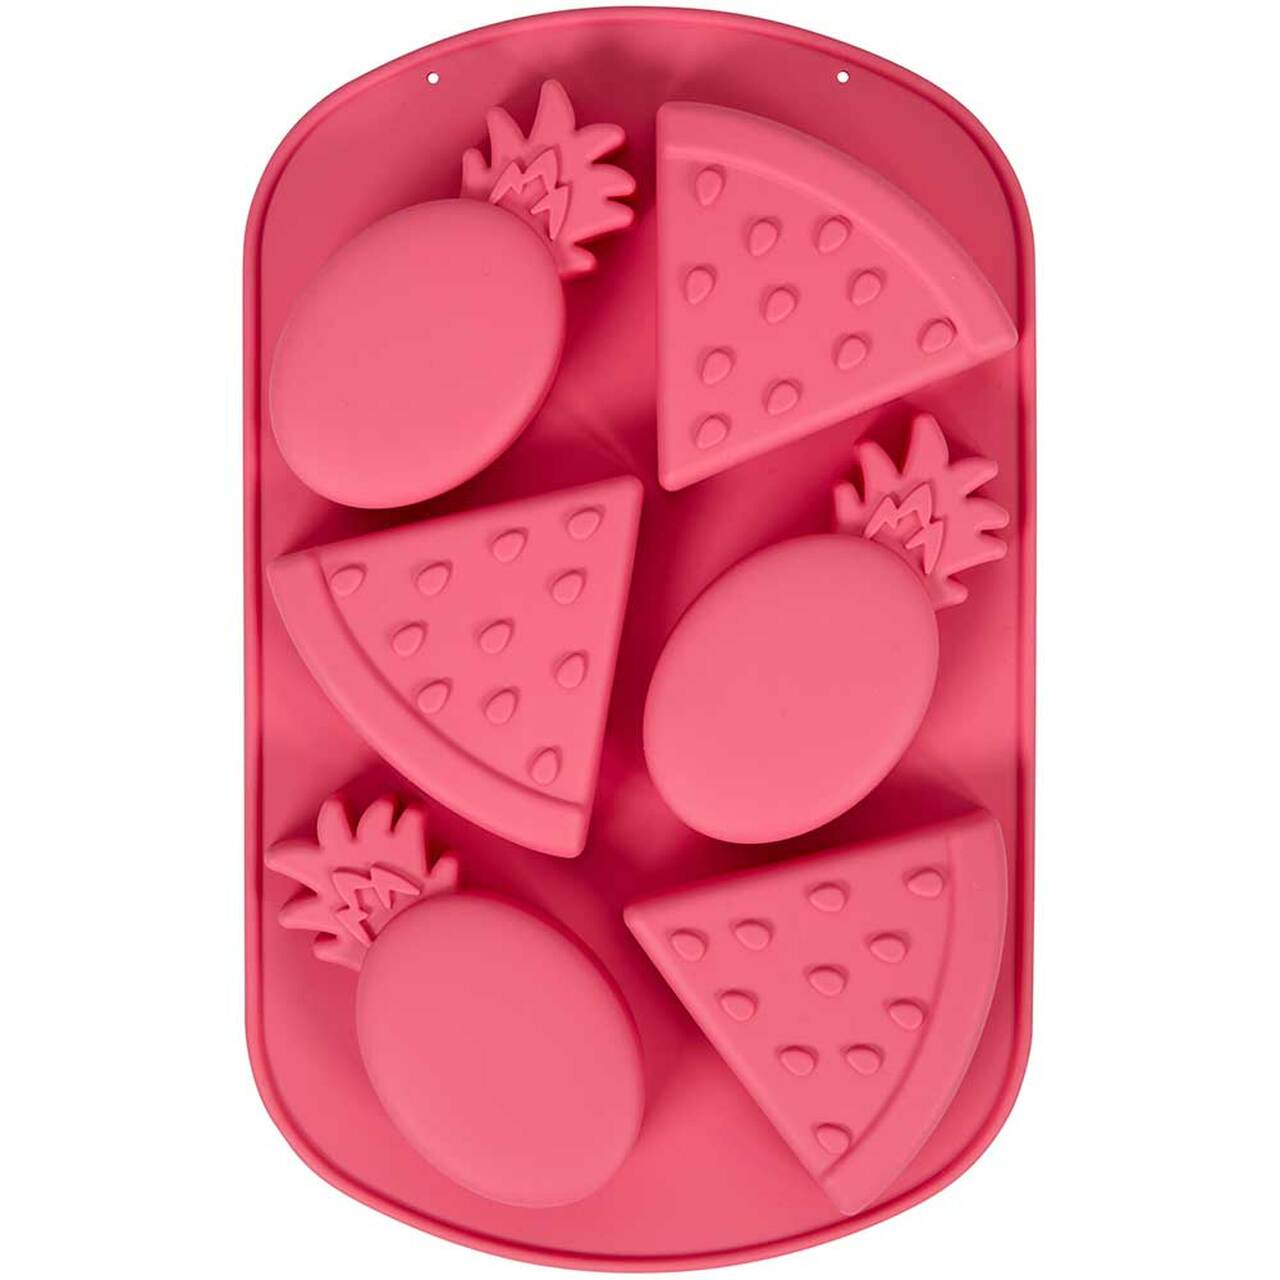 Wilton Melon and Pineapple Silicone Mould